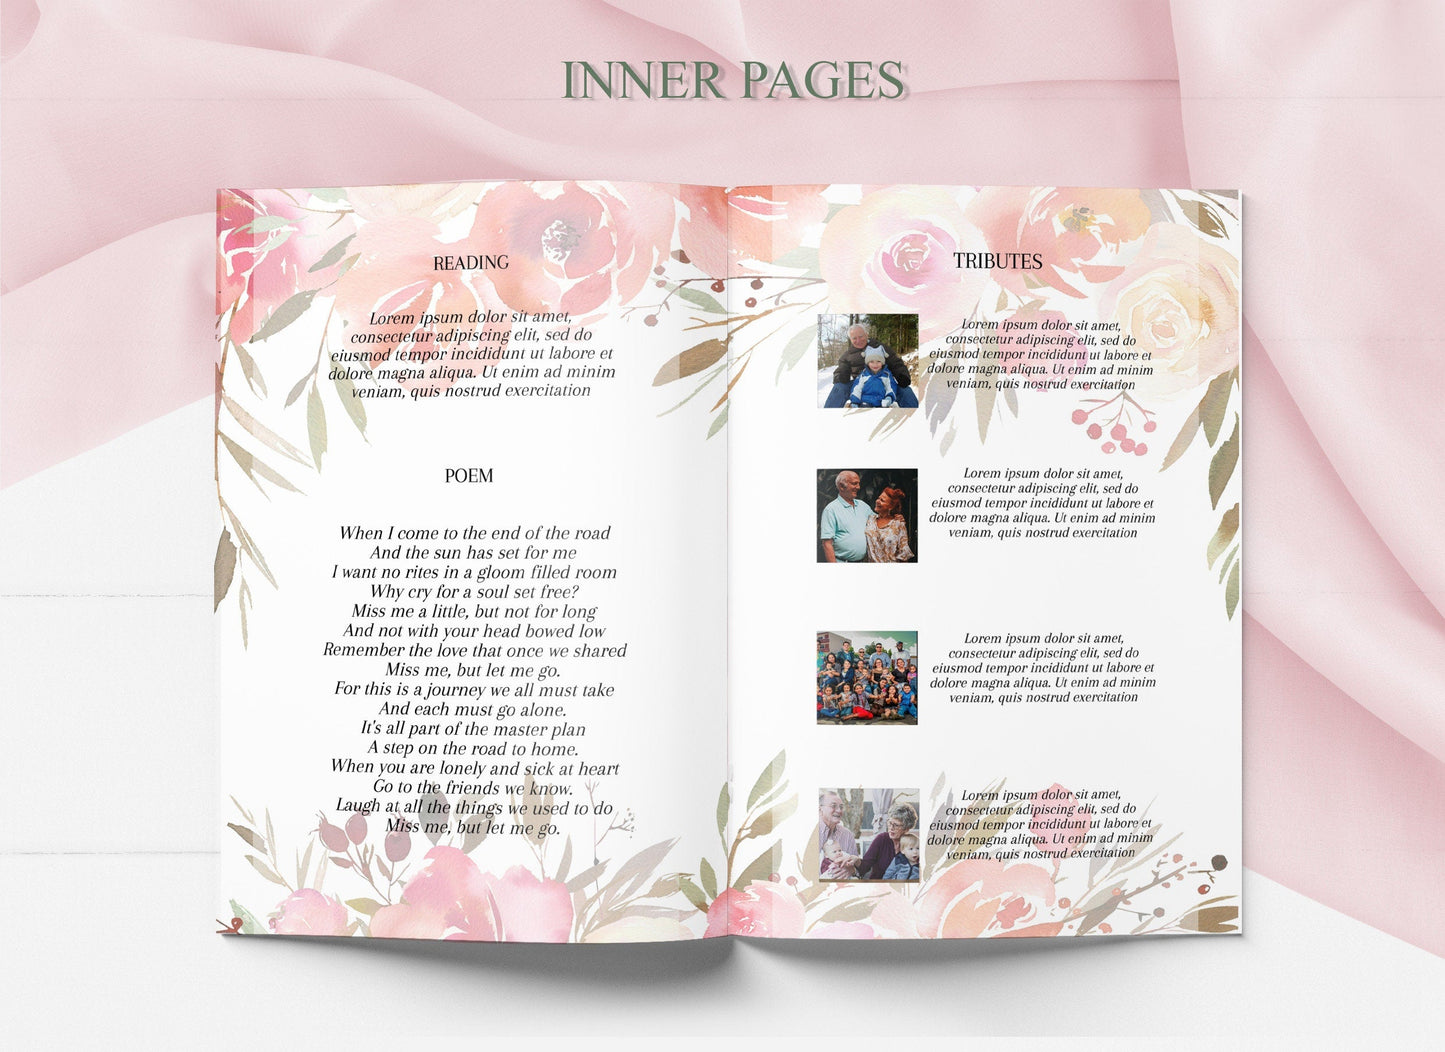 Pink Funeral Program Template for Woman | Obituary Template to Honor Your Loved One | Pink Floral Celebration of Life | A104